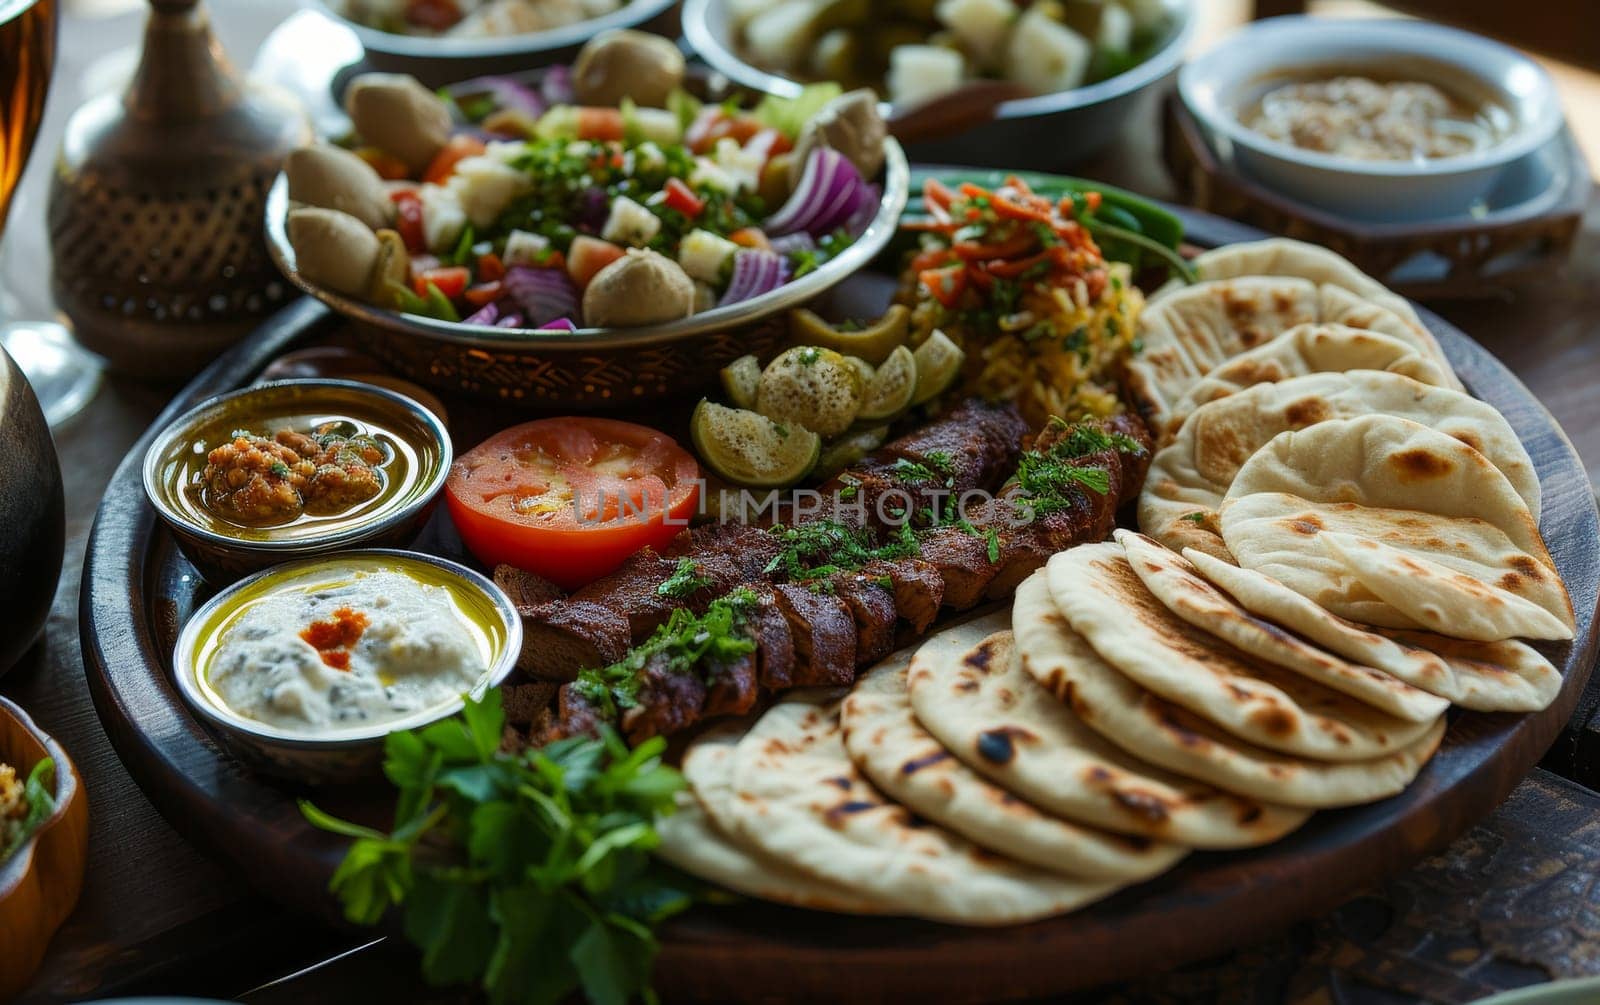 Richly decorated platter of Middle Eastern cuisine featuring kebabs, fresh salads, and an array of dips and bread. by sfinks